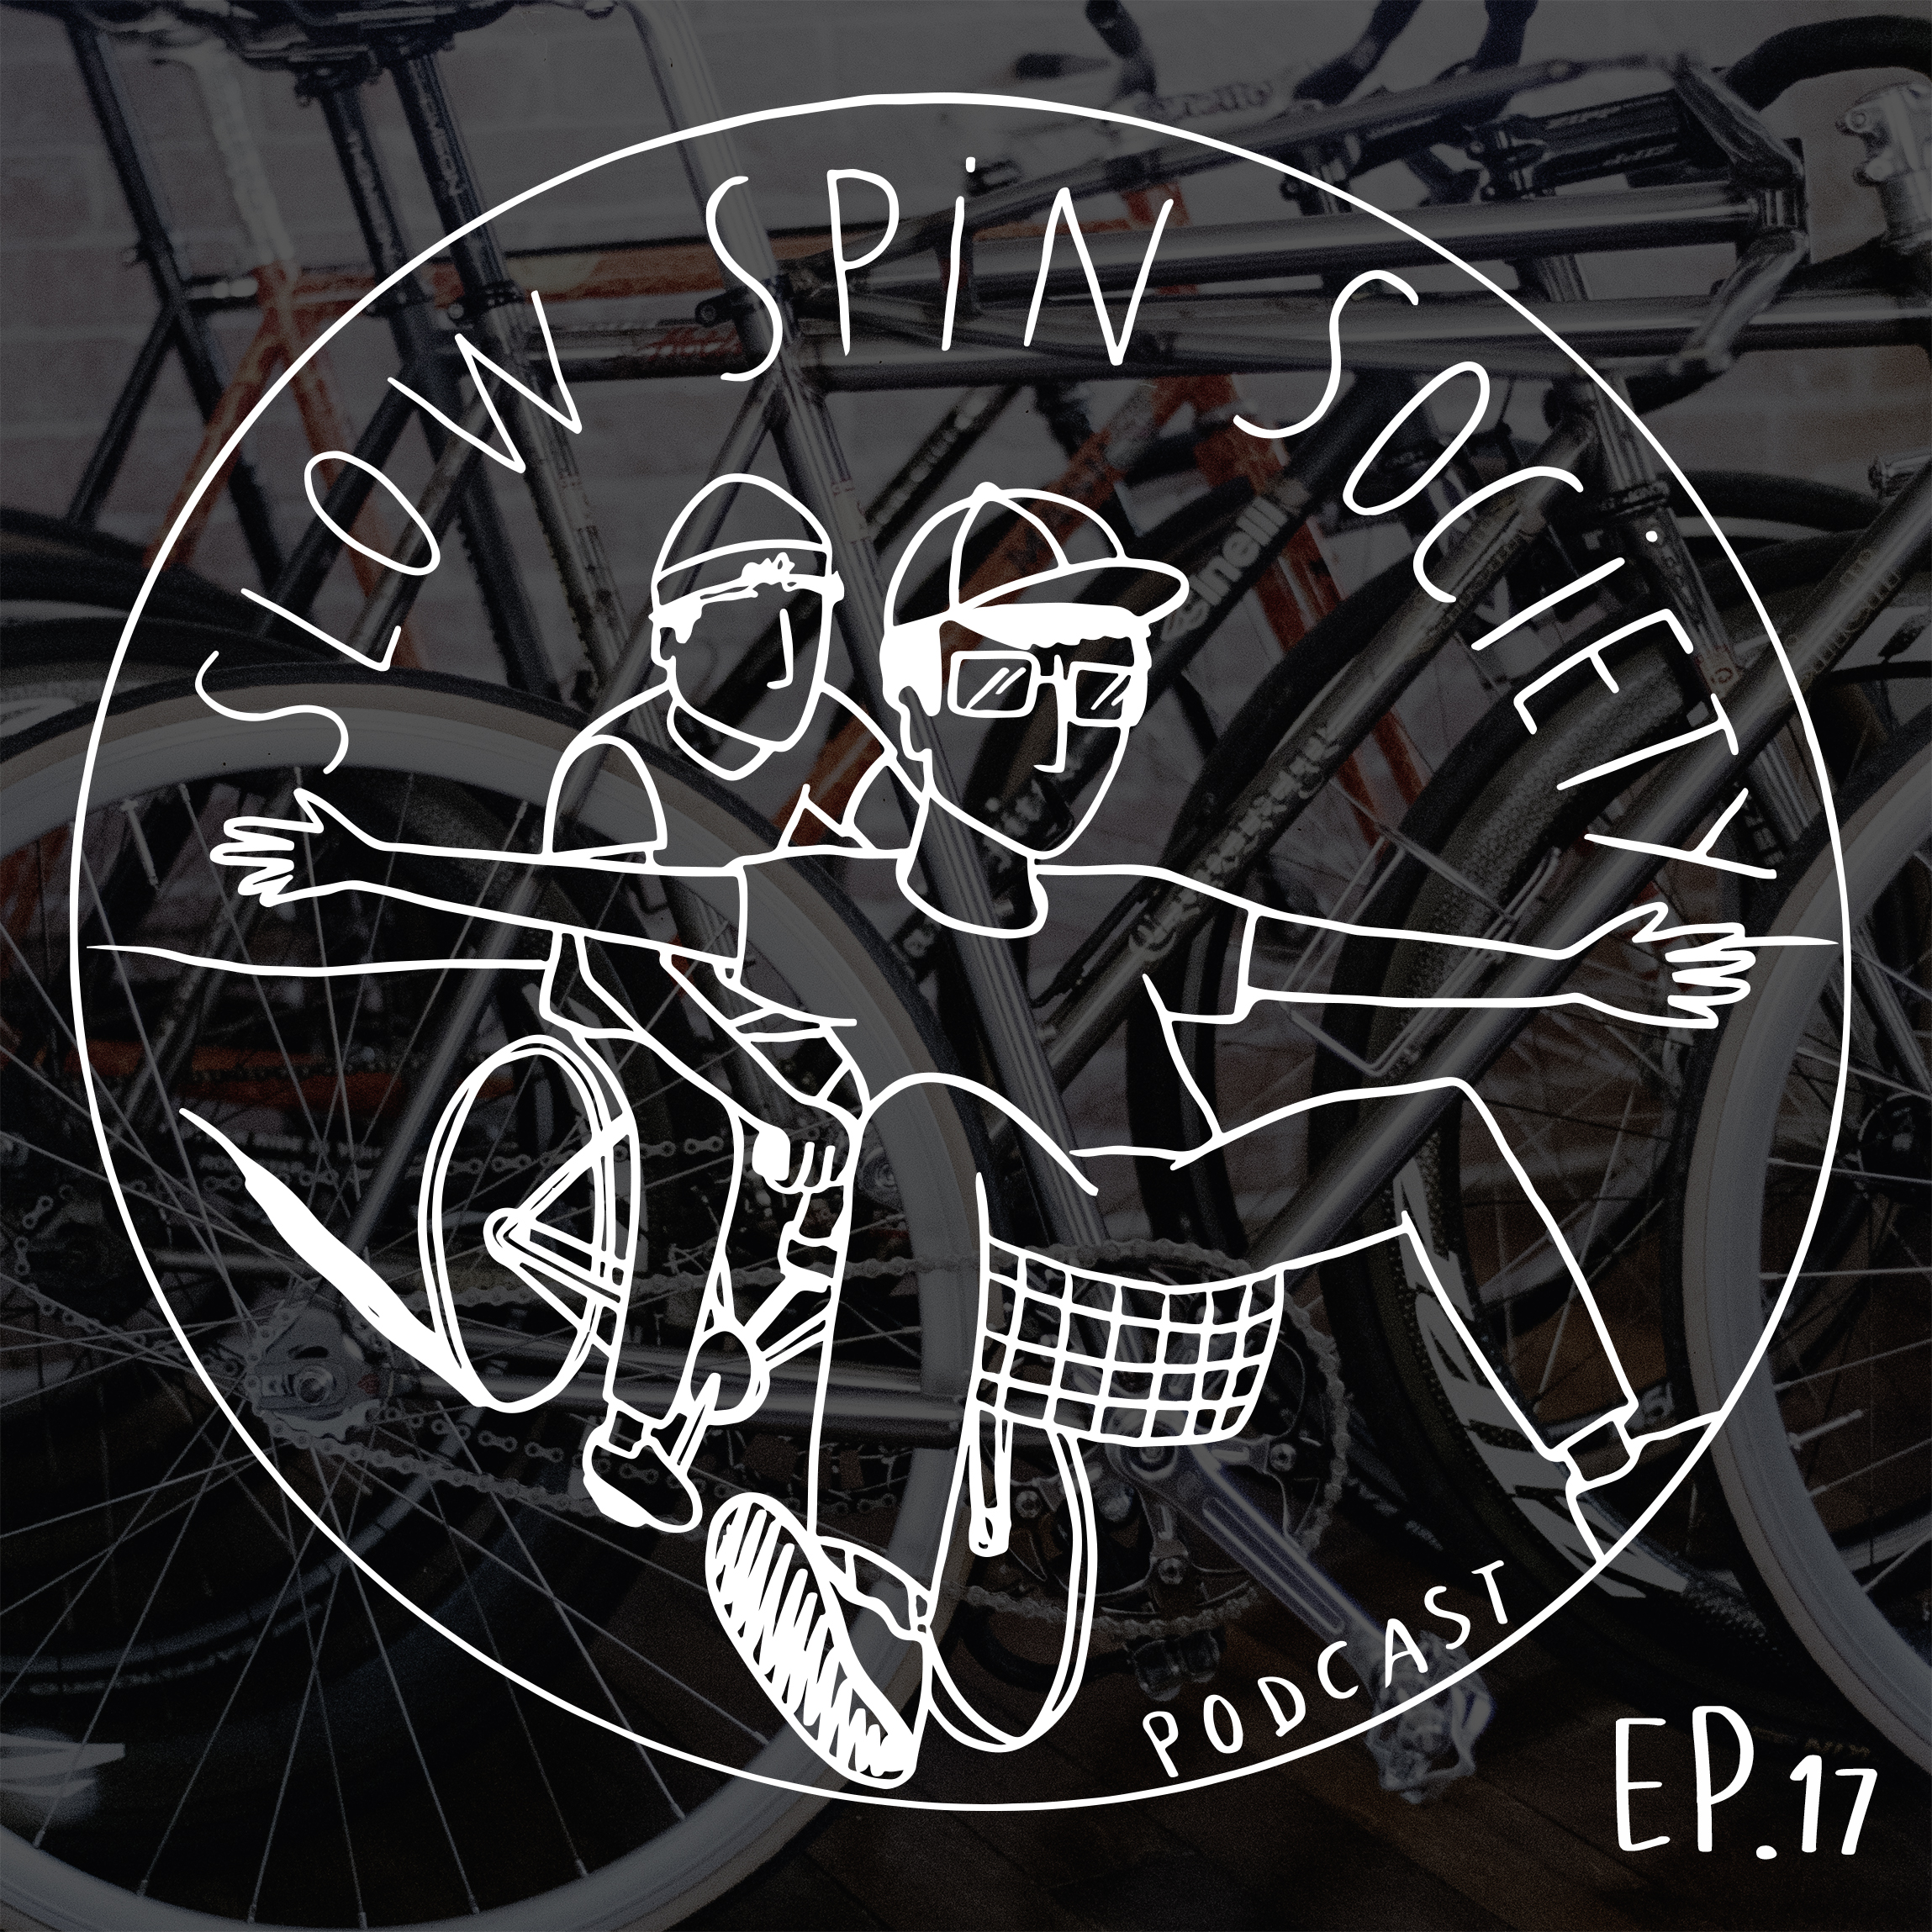 The Slow Spin Society Podcast Ep.17 : Top 10 Upgrades for your Fixed Gear Bike!